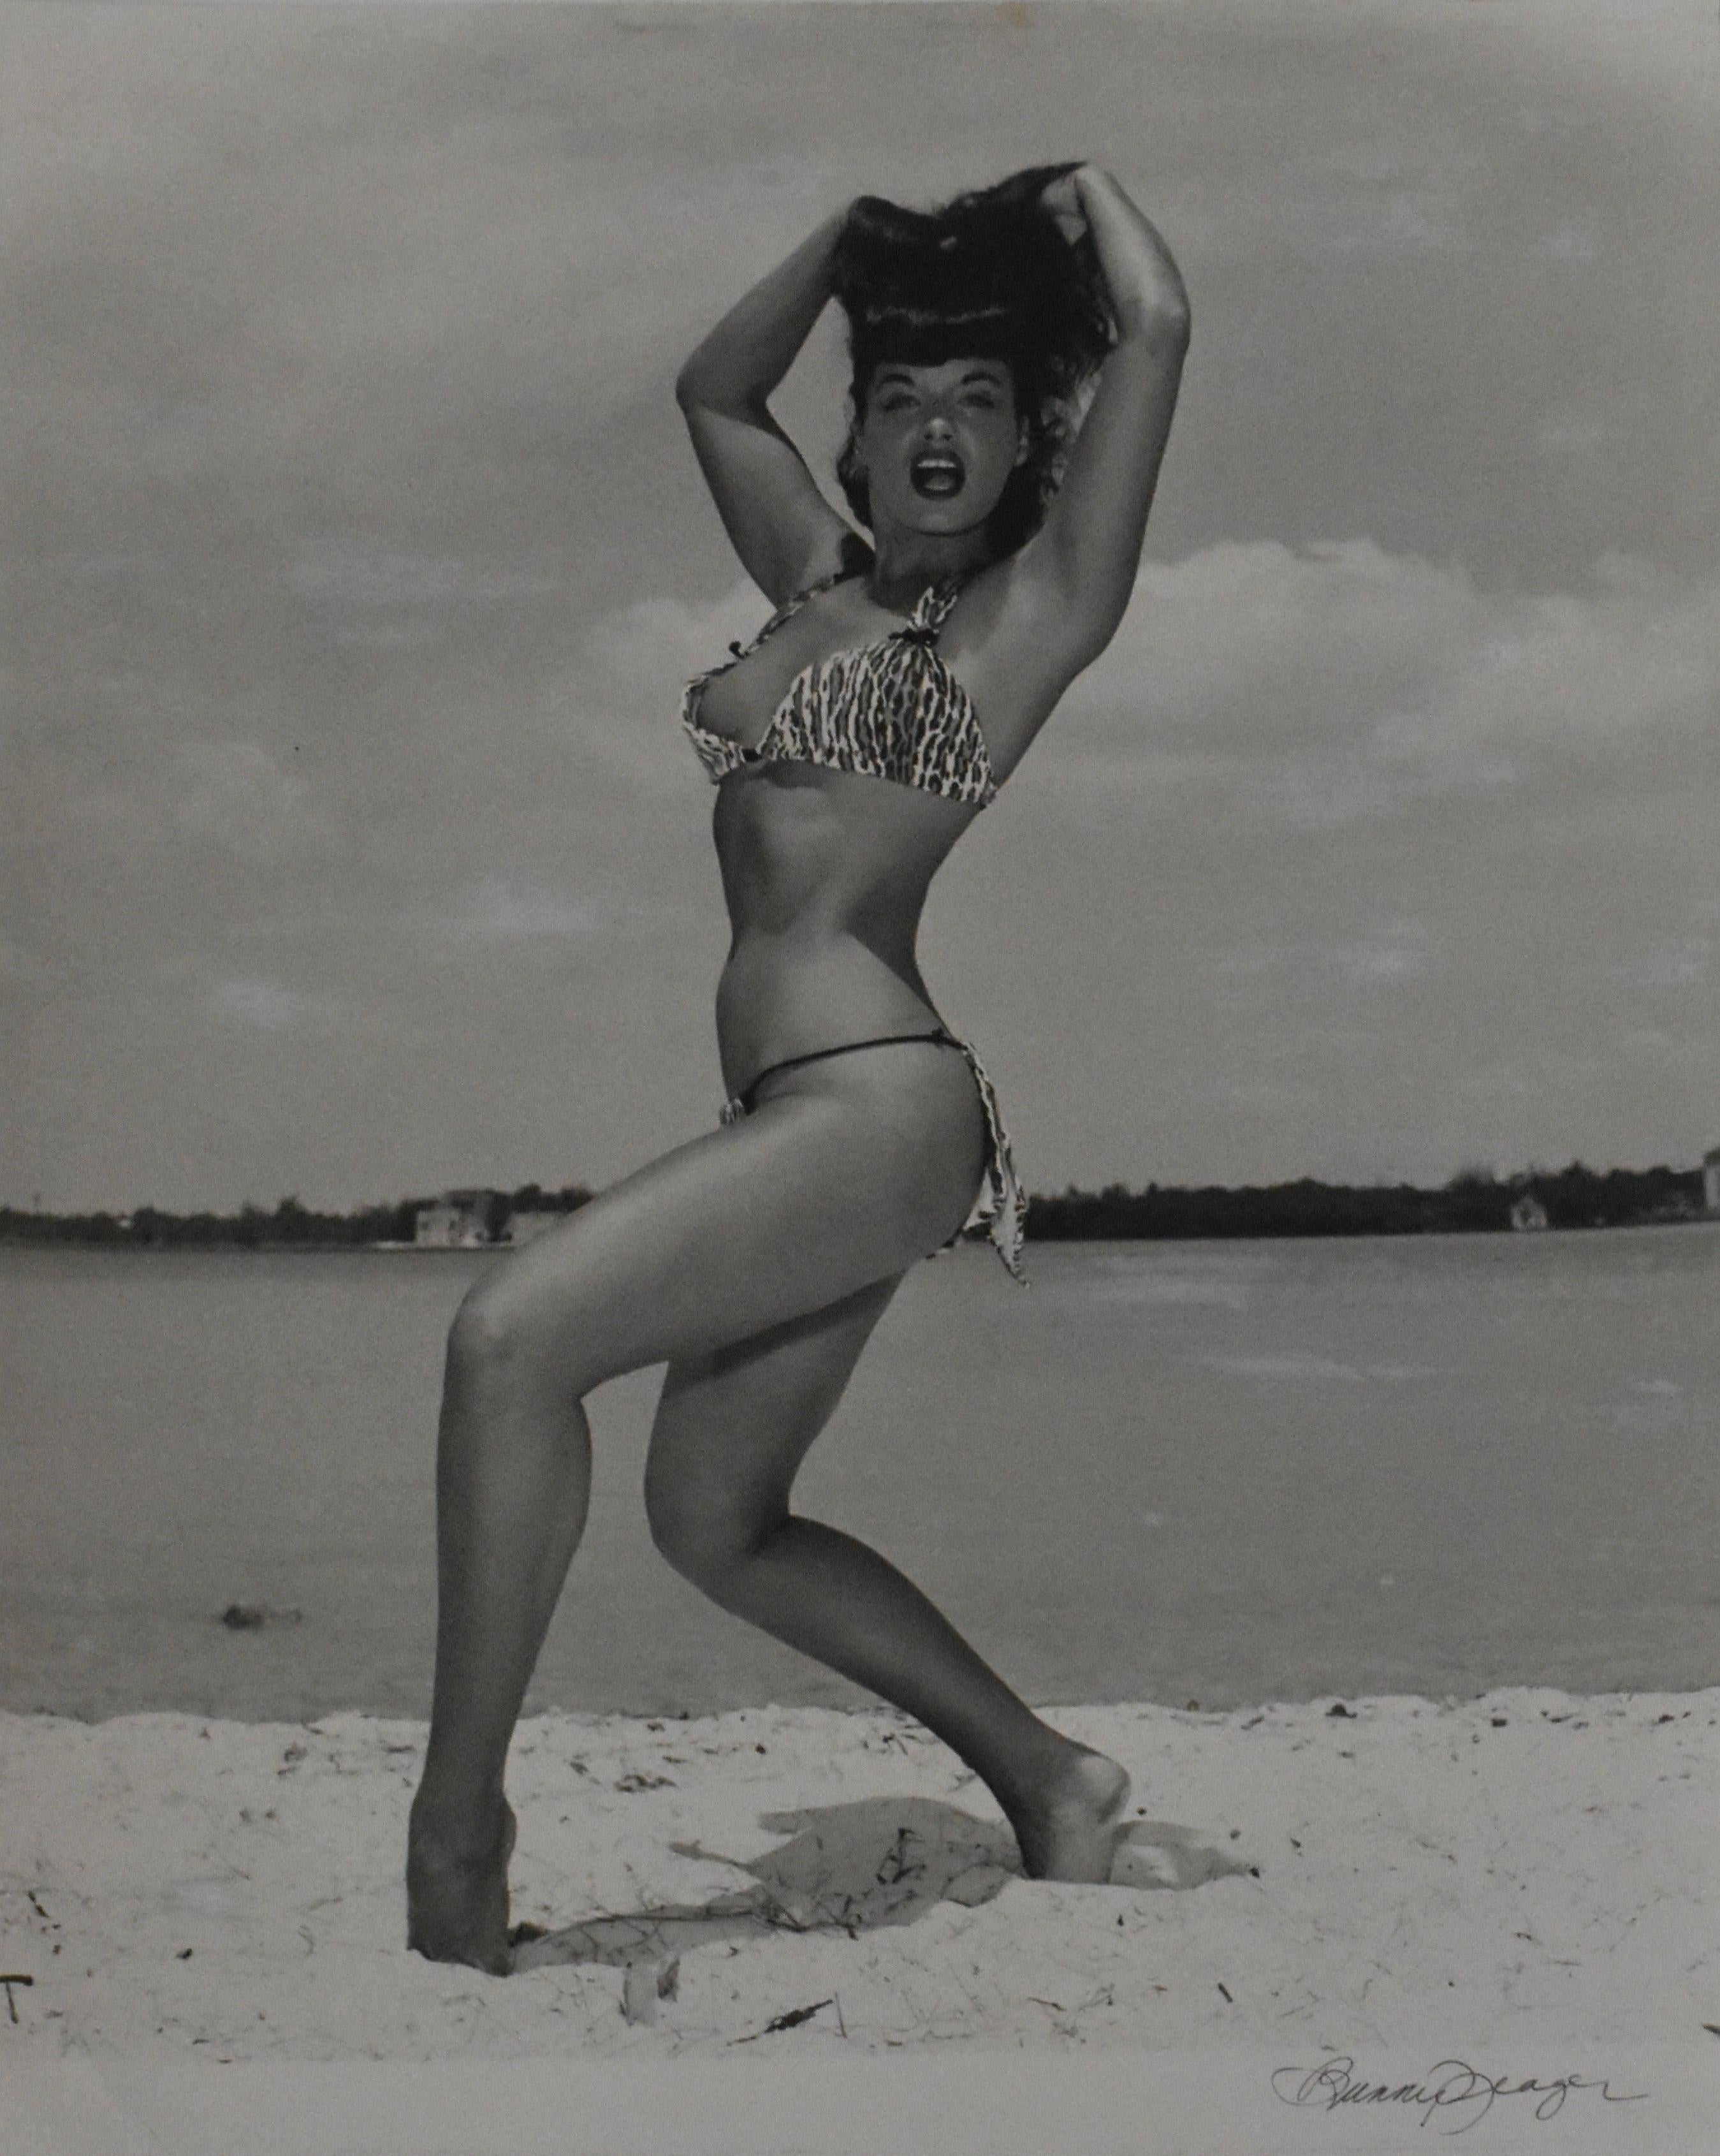 Bettie Page ‘Two-Piece Leopard Print Suit', Key Biscayne, FL, 1954 - Photograph by Bunny Yeager